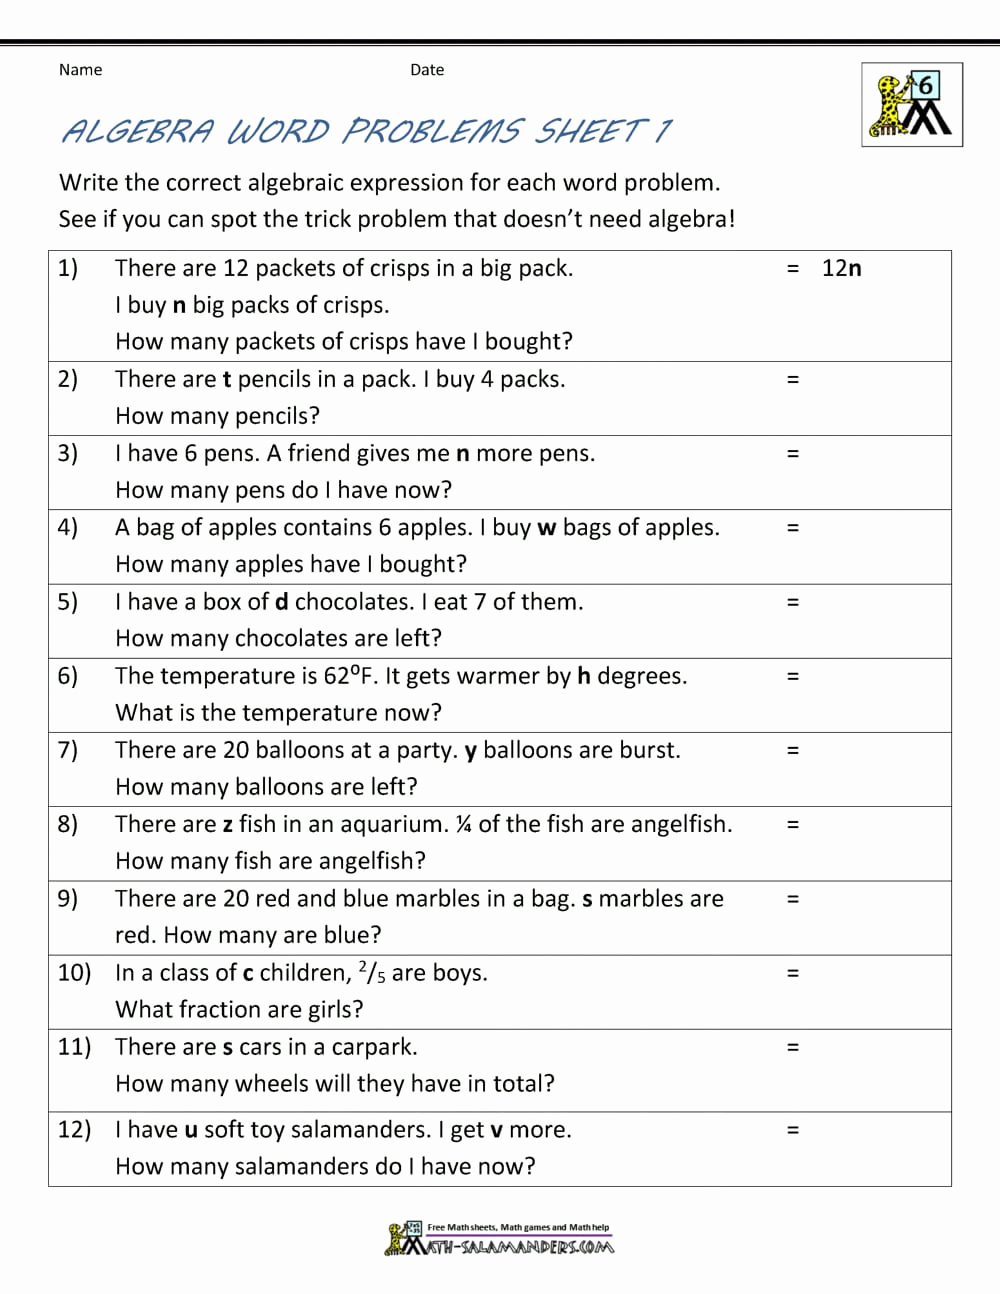 Writing Numerical Expressions Worksheets Elegant Writing Algebraic Expressions Worksheet Pdf — Excelguider